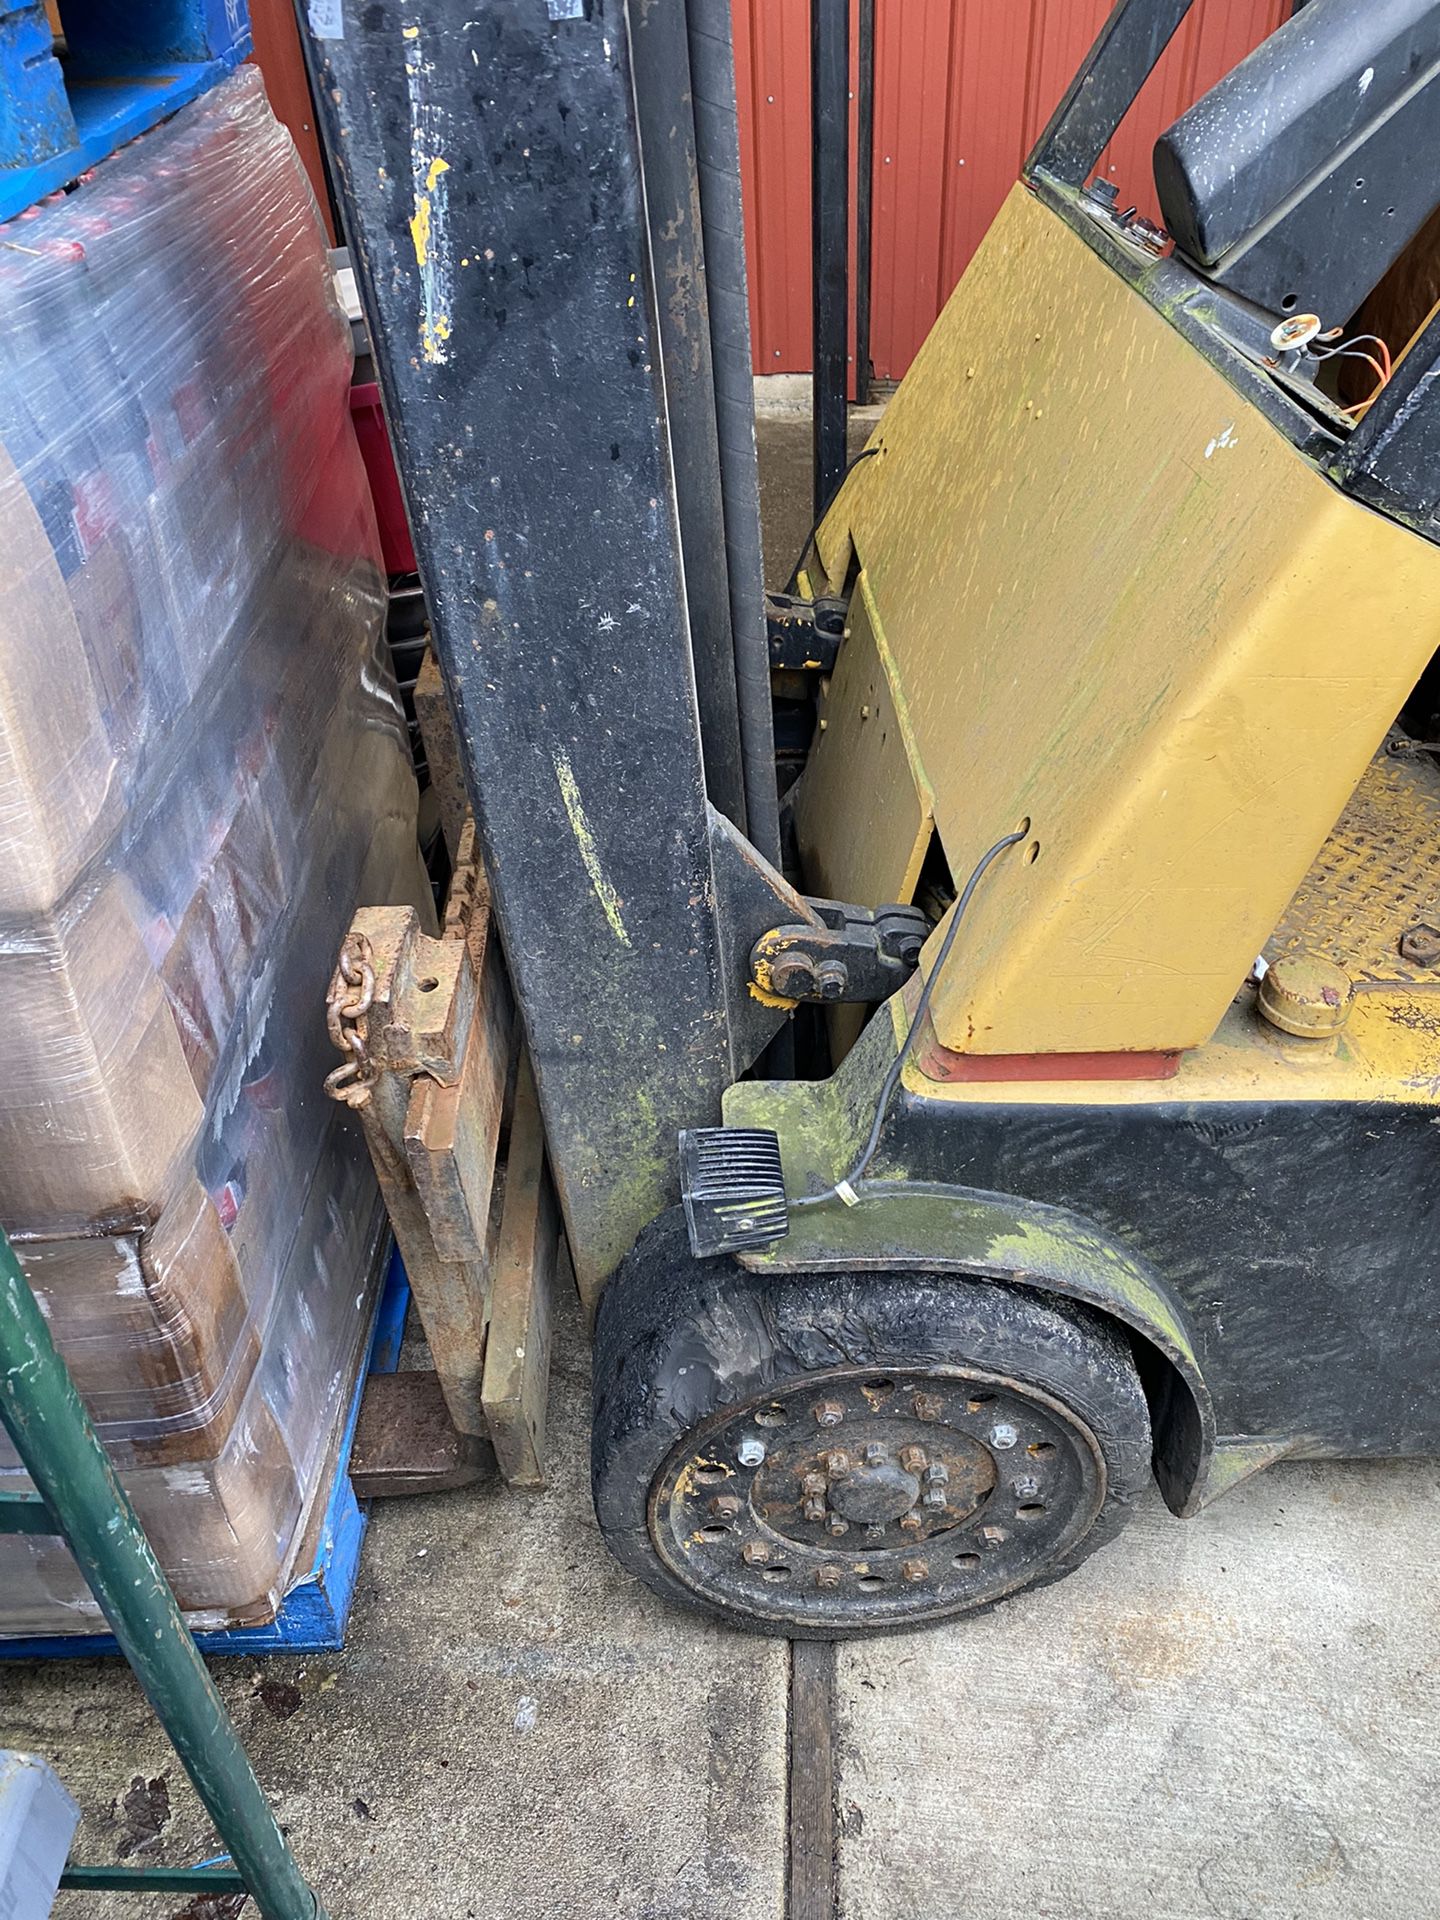 Hyster Fork Lift